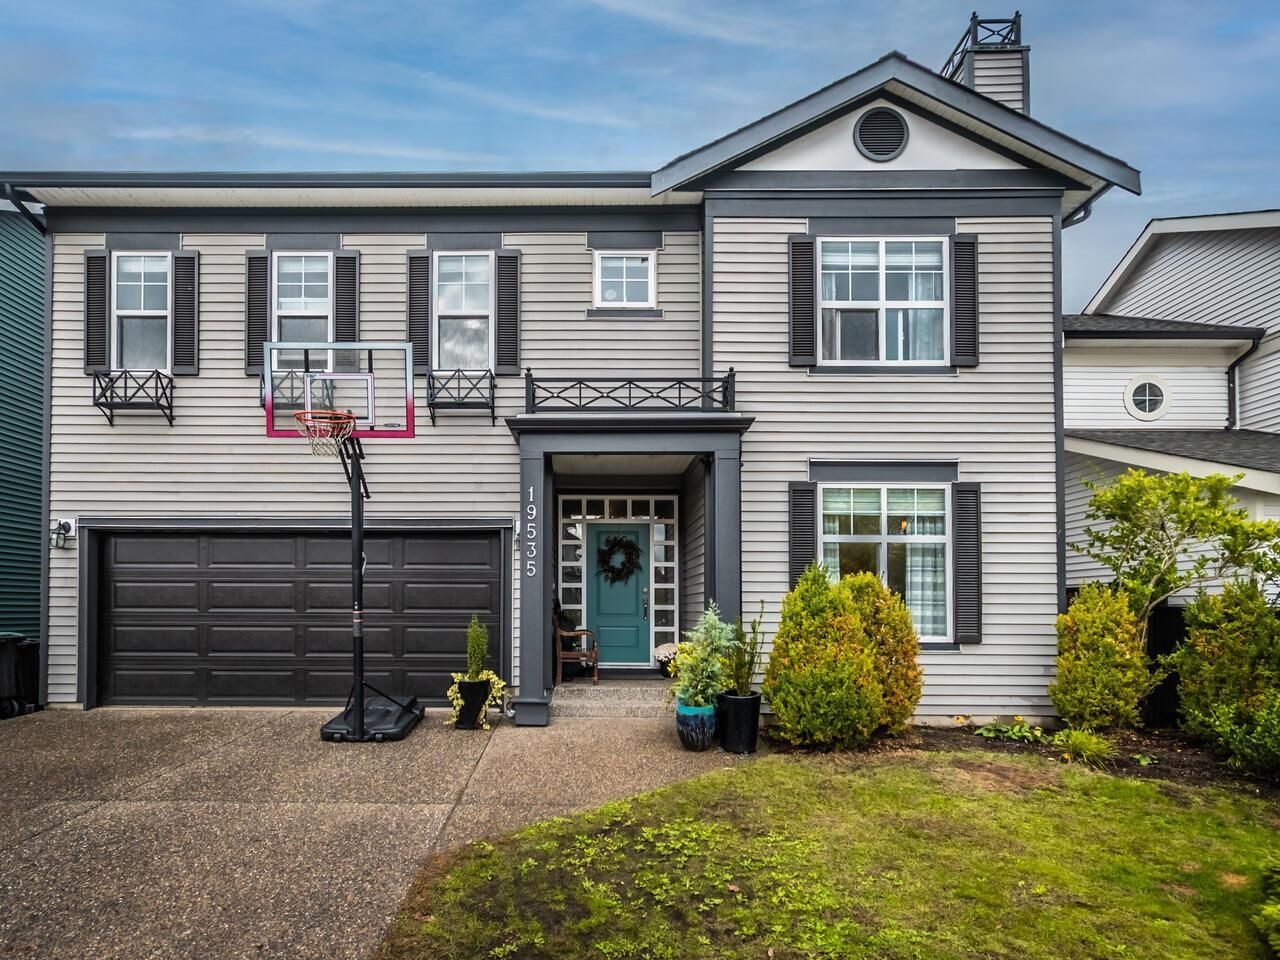 New property listed in South Meadows, Pitt Meadows